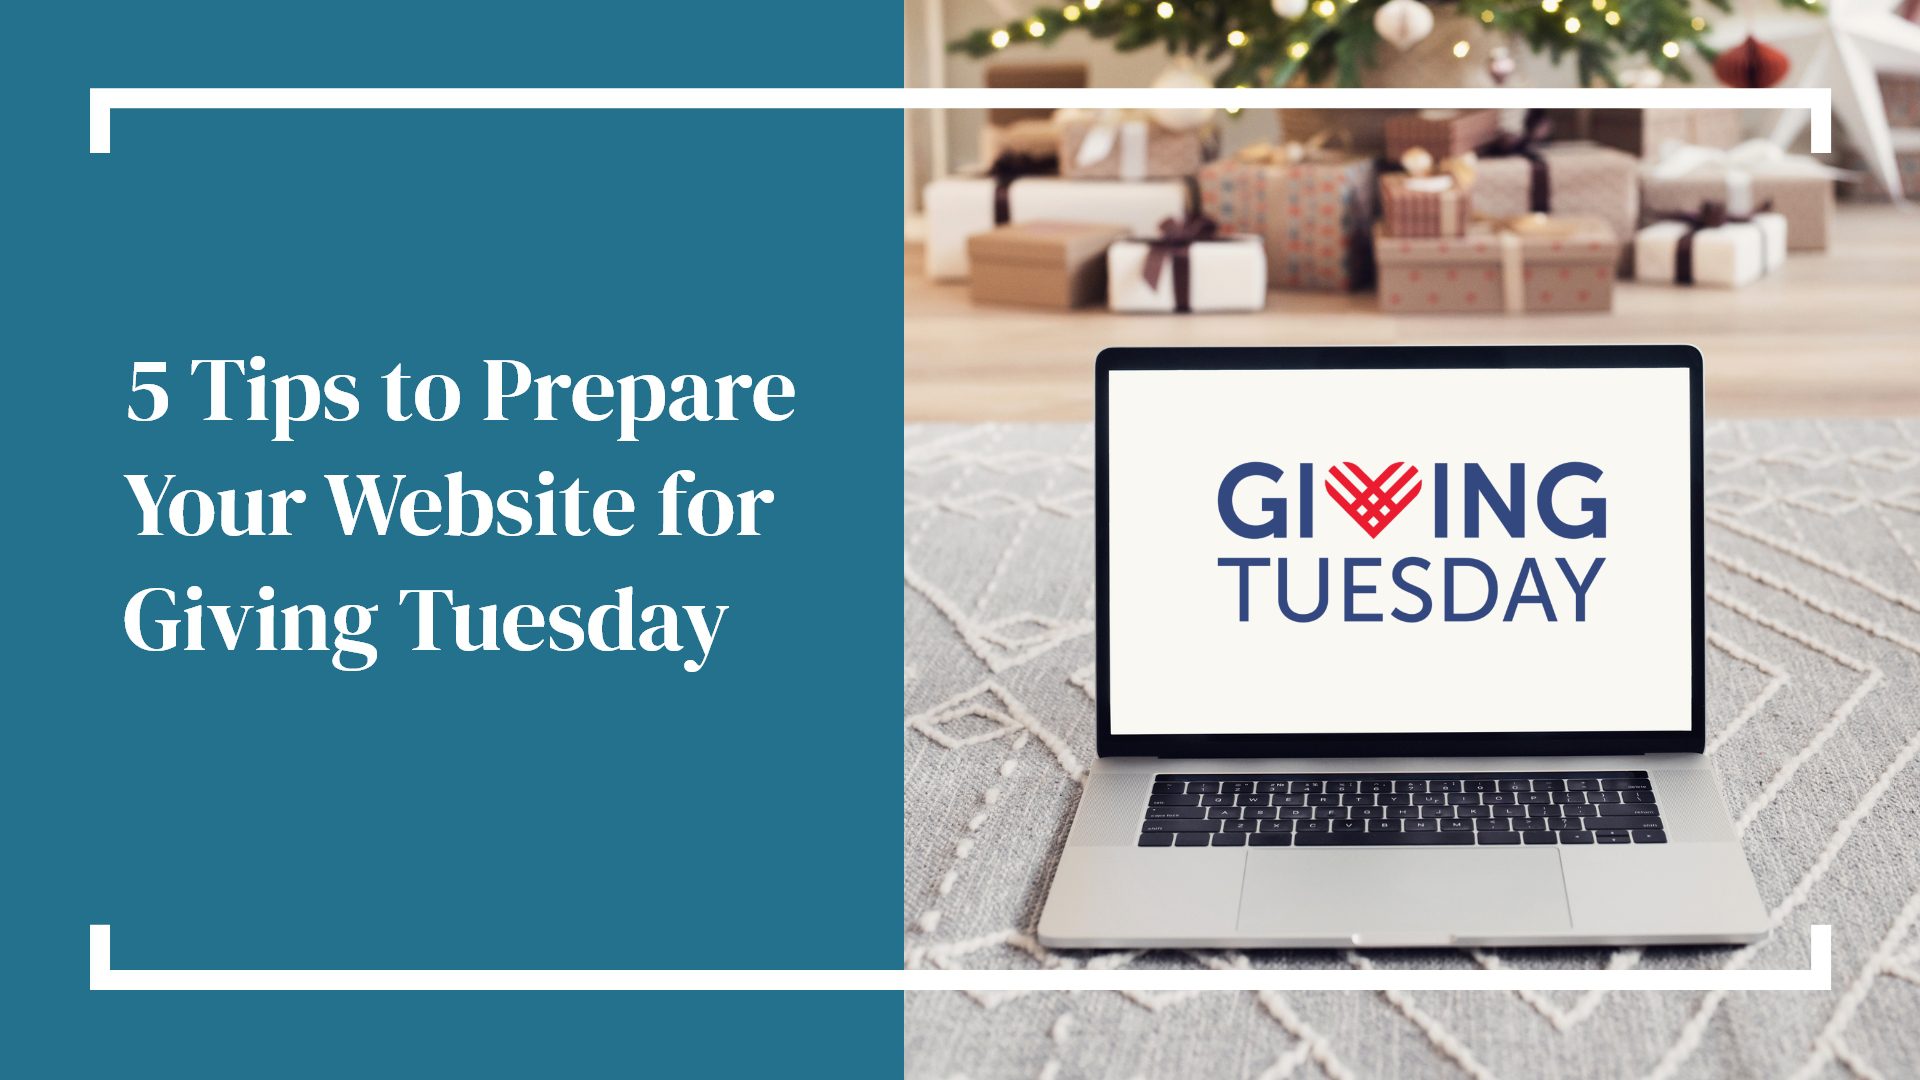 5 Tips to Prepare Your Website for Giving Tuesday